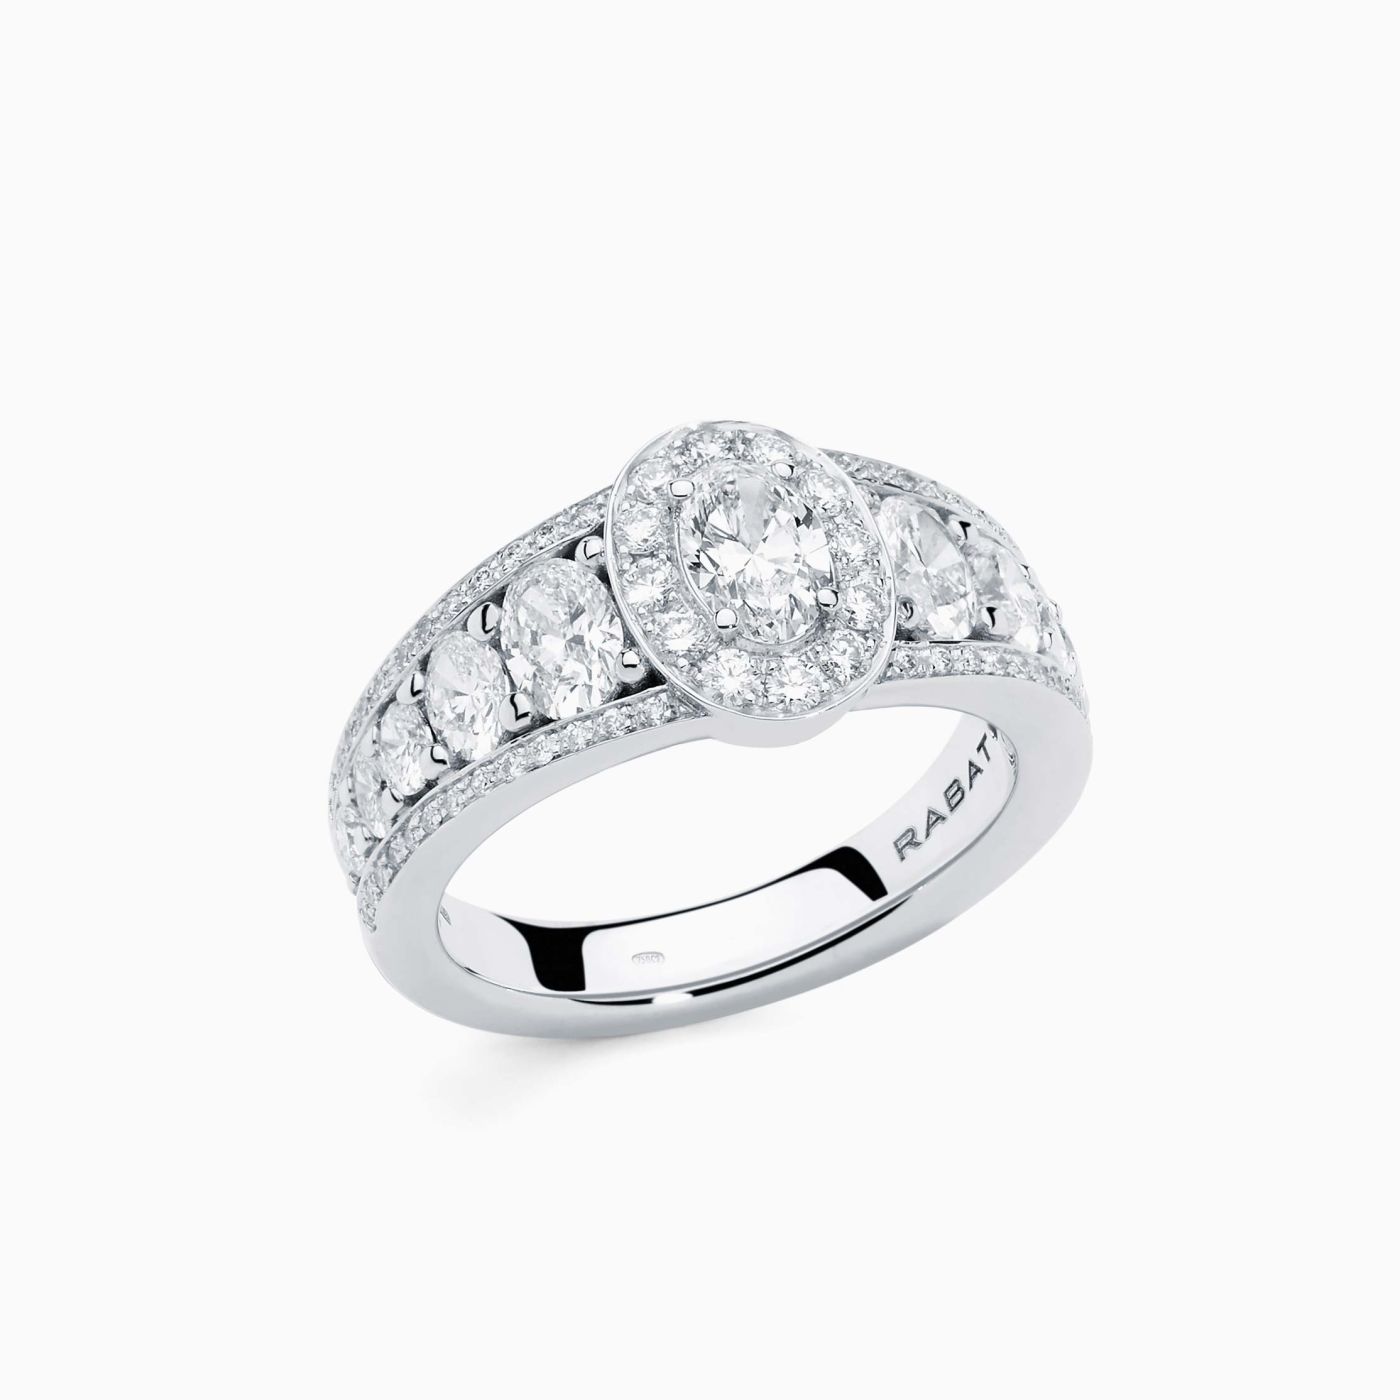 White gold with an oval diamond in the center ring